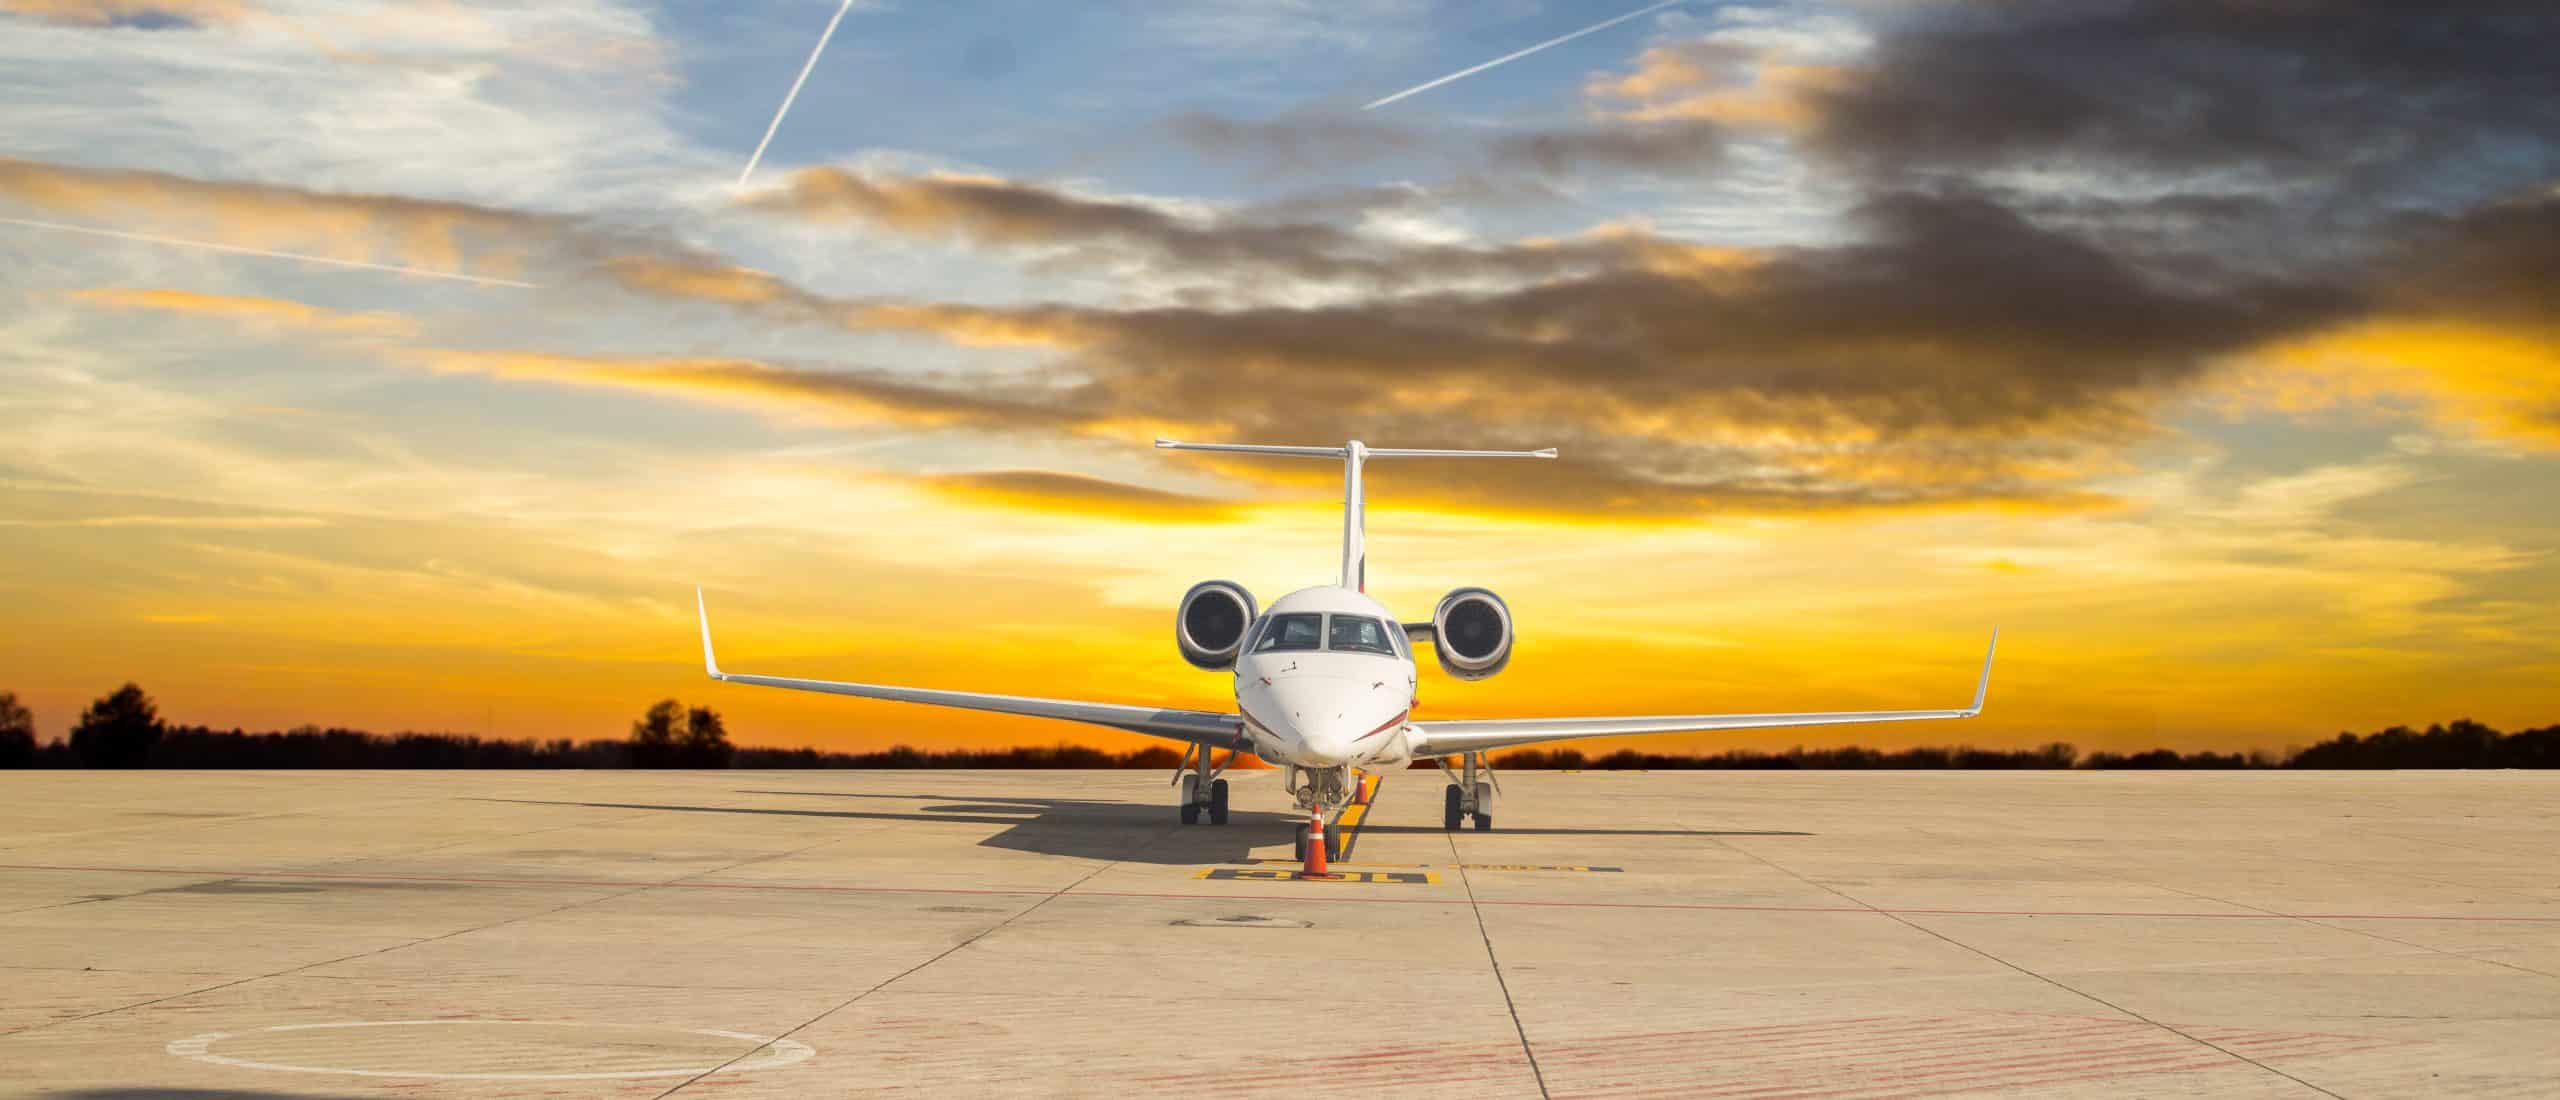 A magnificent private jet basks in the warm glow of a breathtaking sunset, symbolizing the pinnacle of luxury travel and the ultimate flying experience